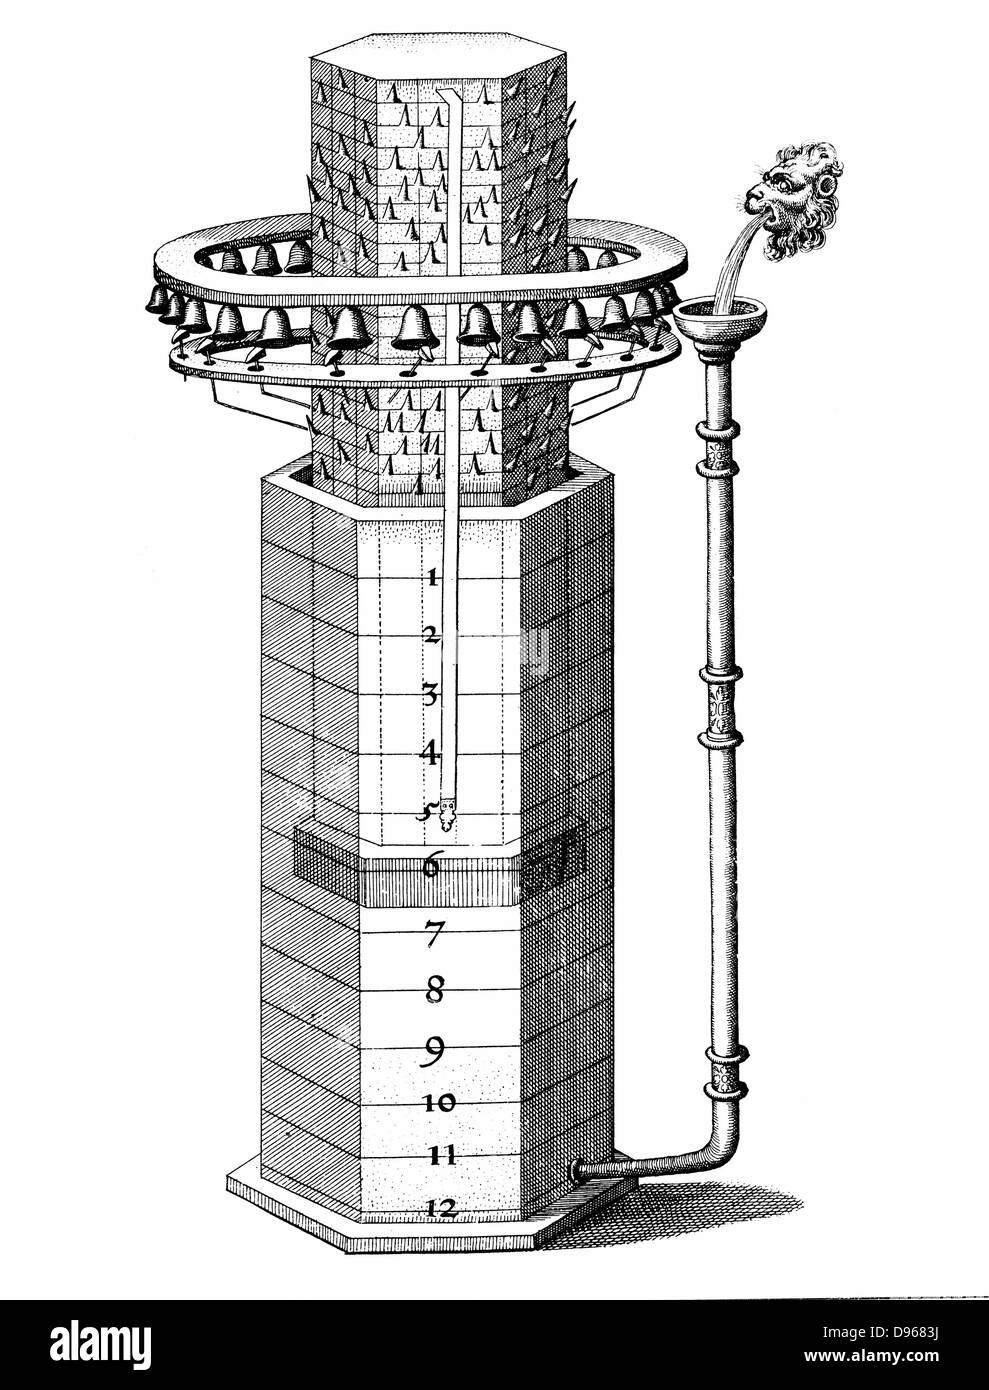 Clepsydra (water clock) indicating hours and with a chime. From Robert Fludd 'Utriusque cosmi ...  historia' ,Oppenheim, 1617-19. Engraving Stock Photo